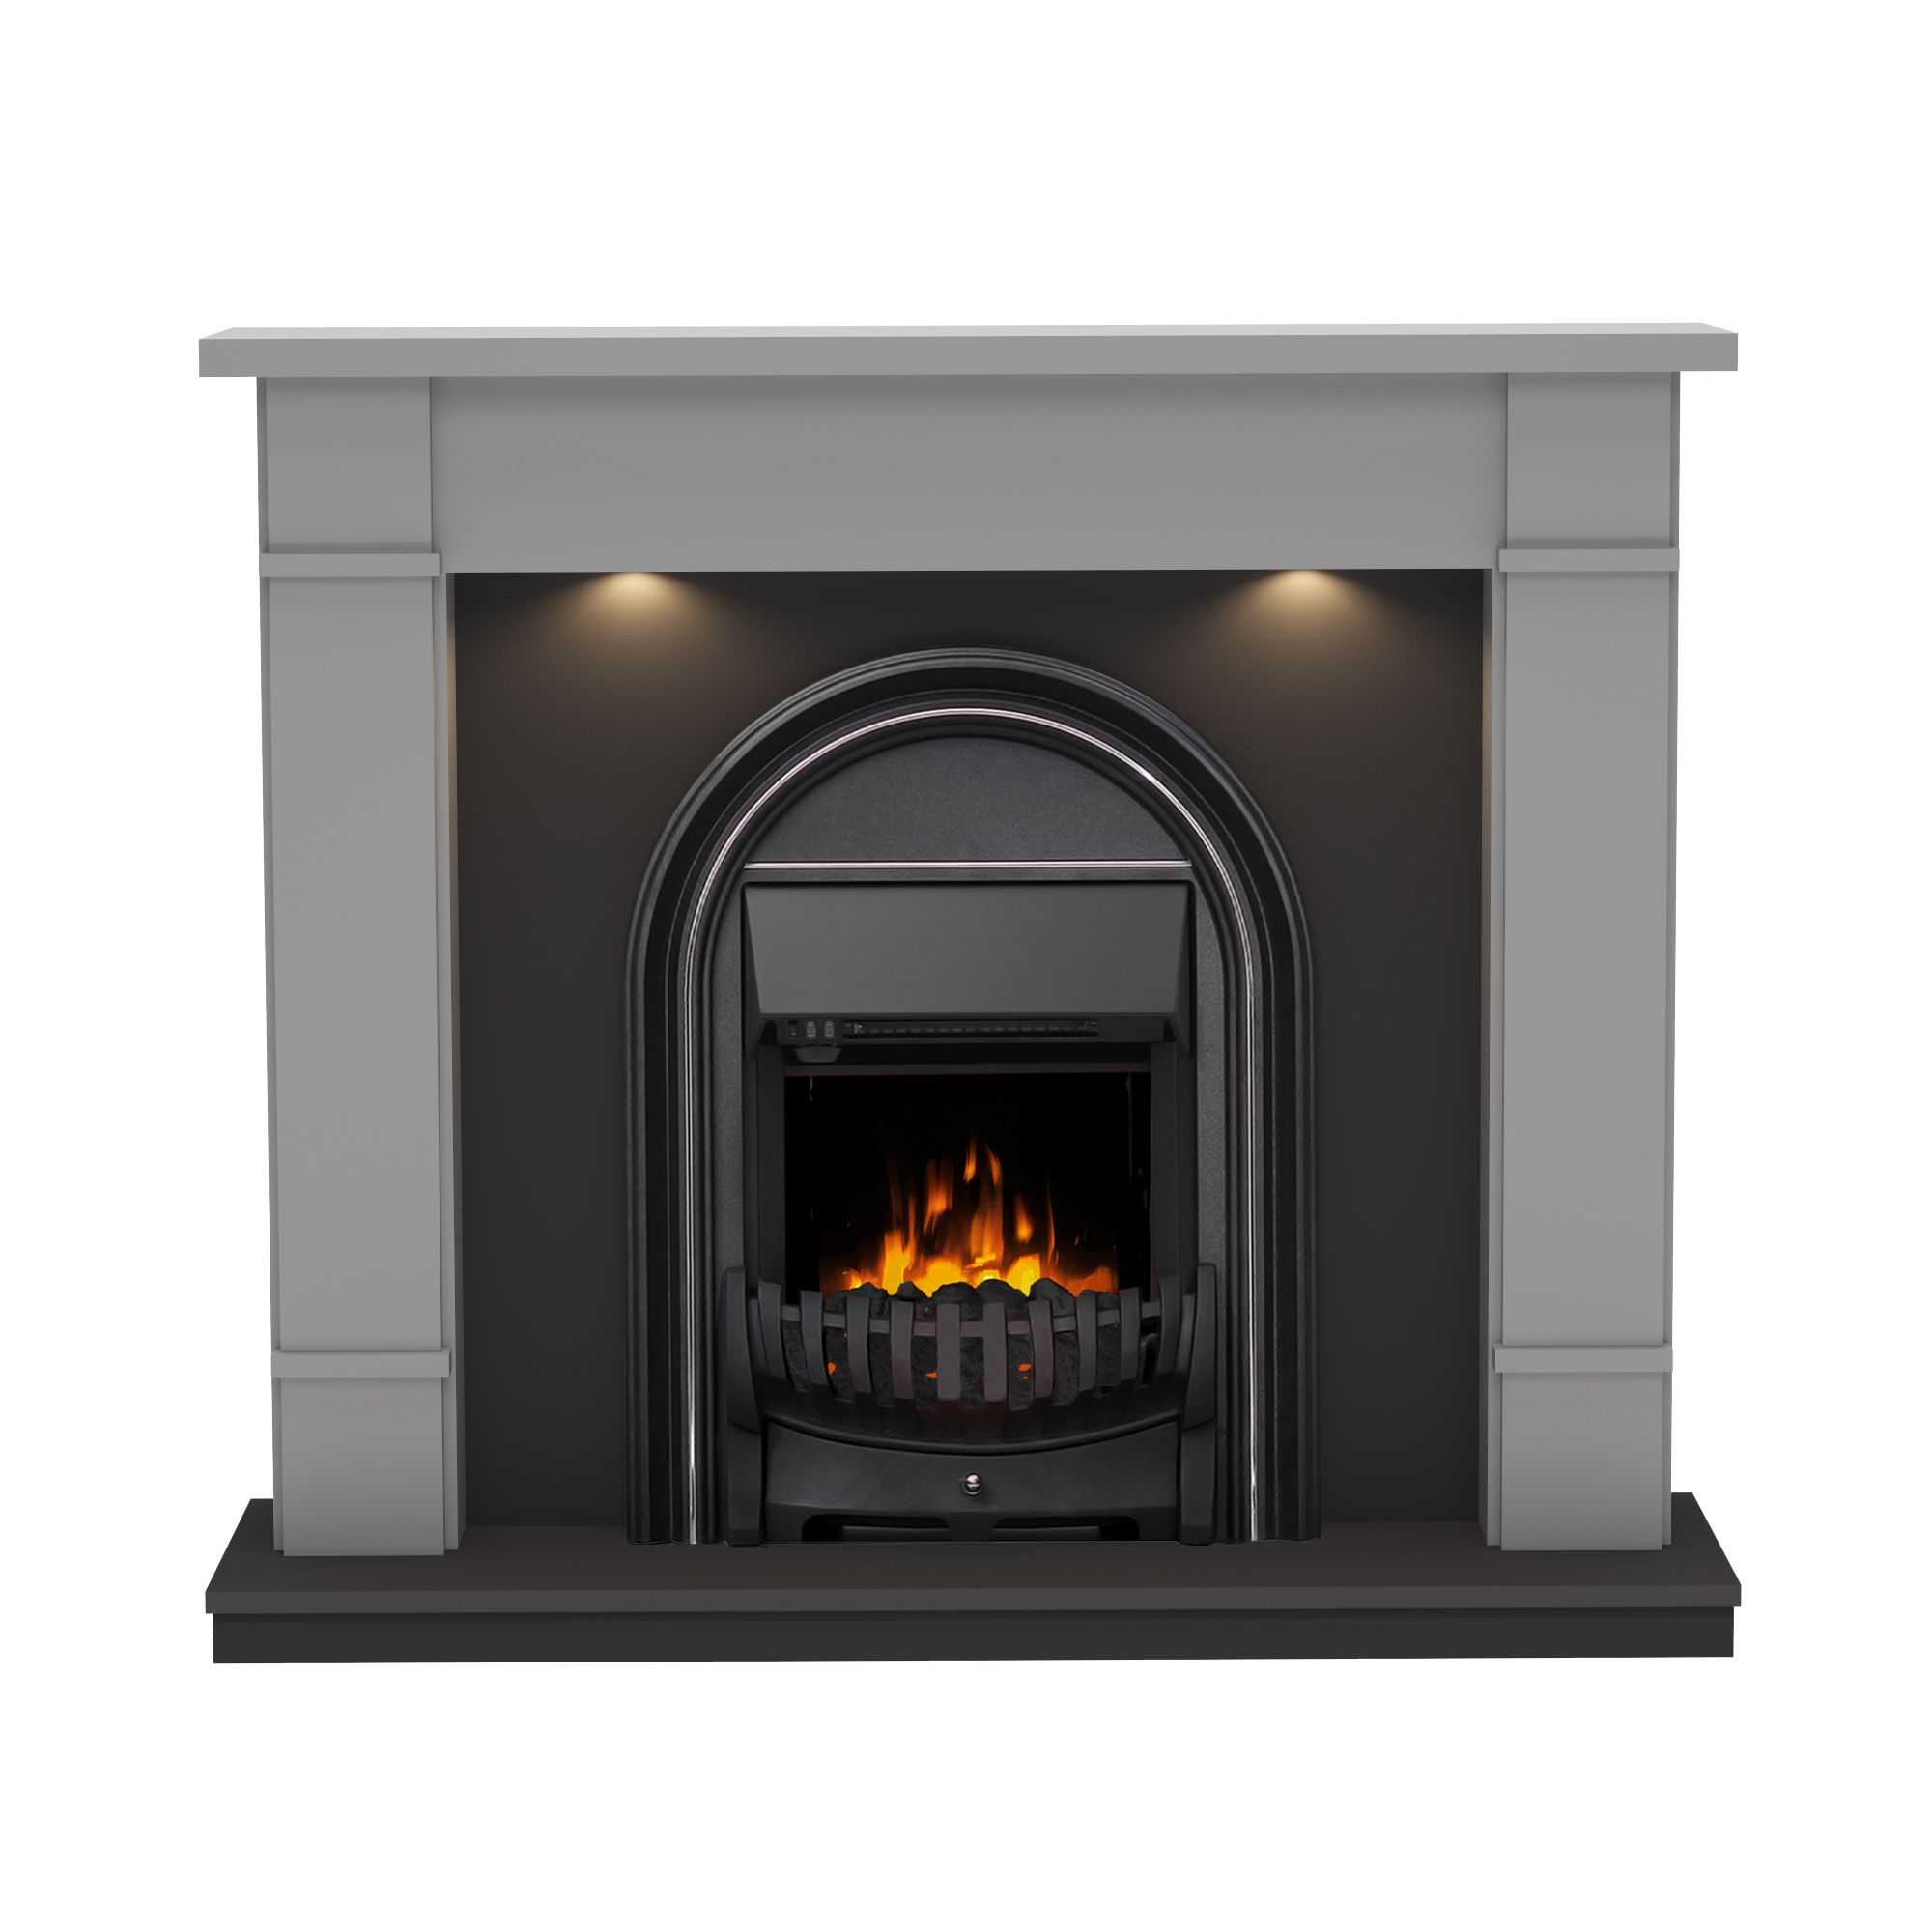 Be Modern Deansgate Light grey & black Electric Fire suite